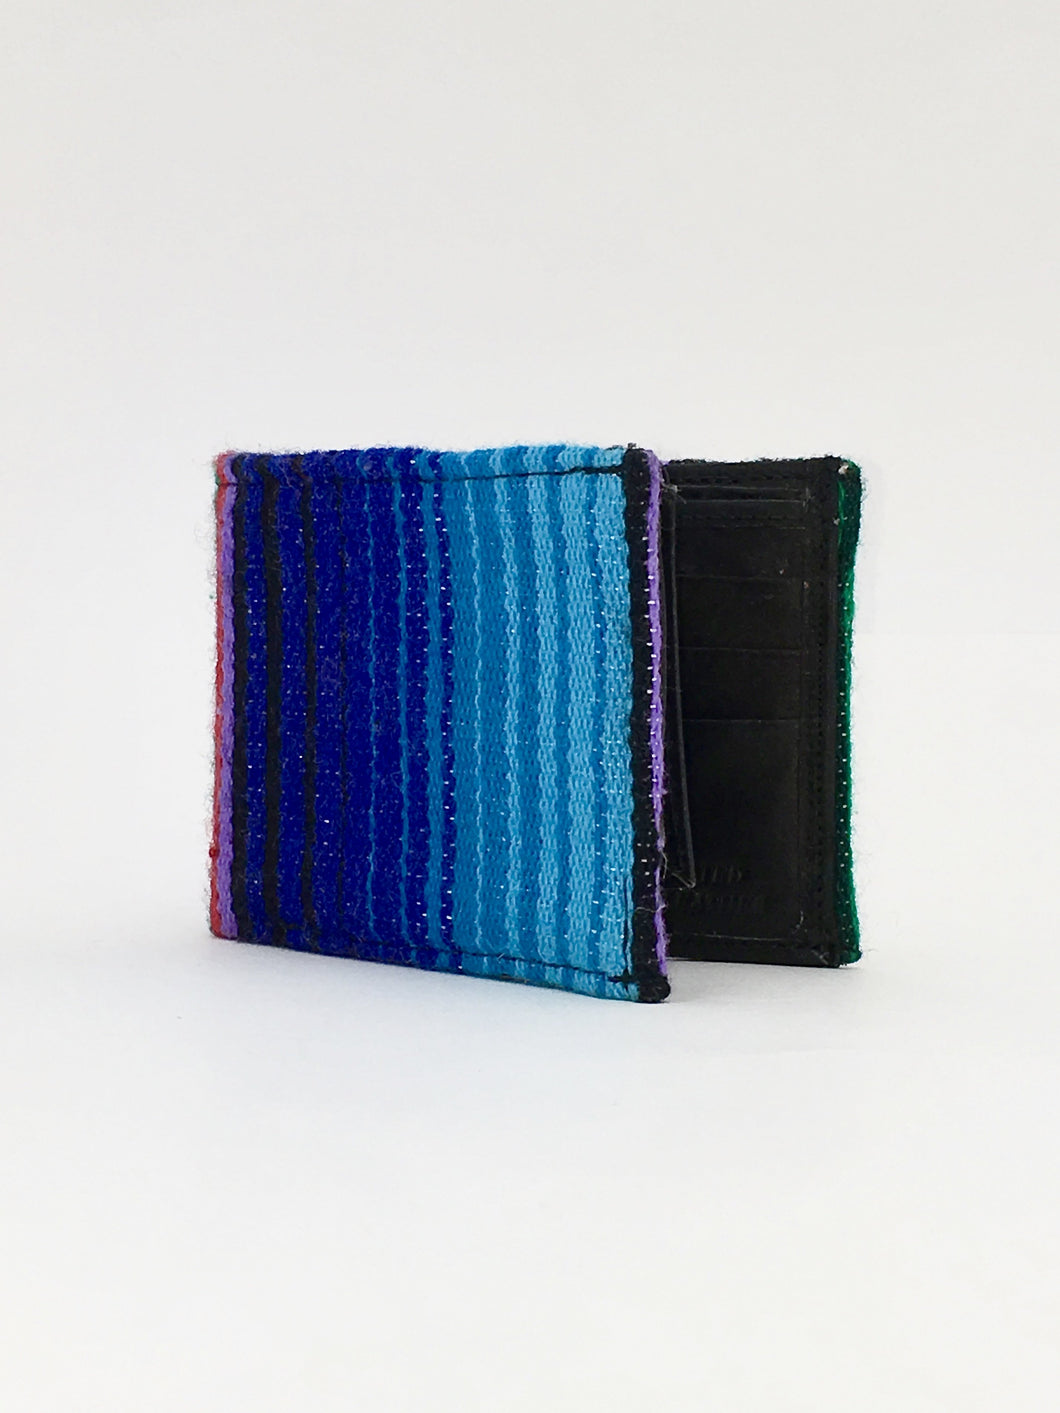 Blue and purple woven sarape textile handcrafted billfold wallet